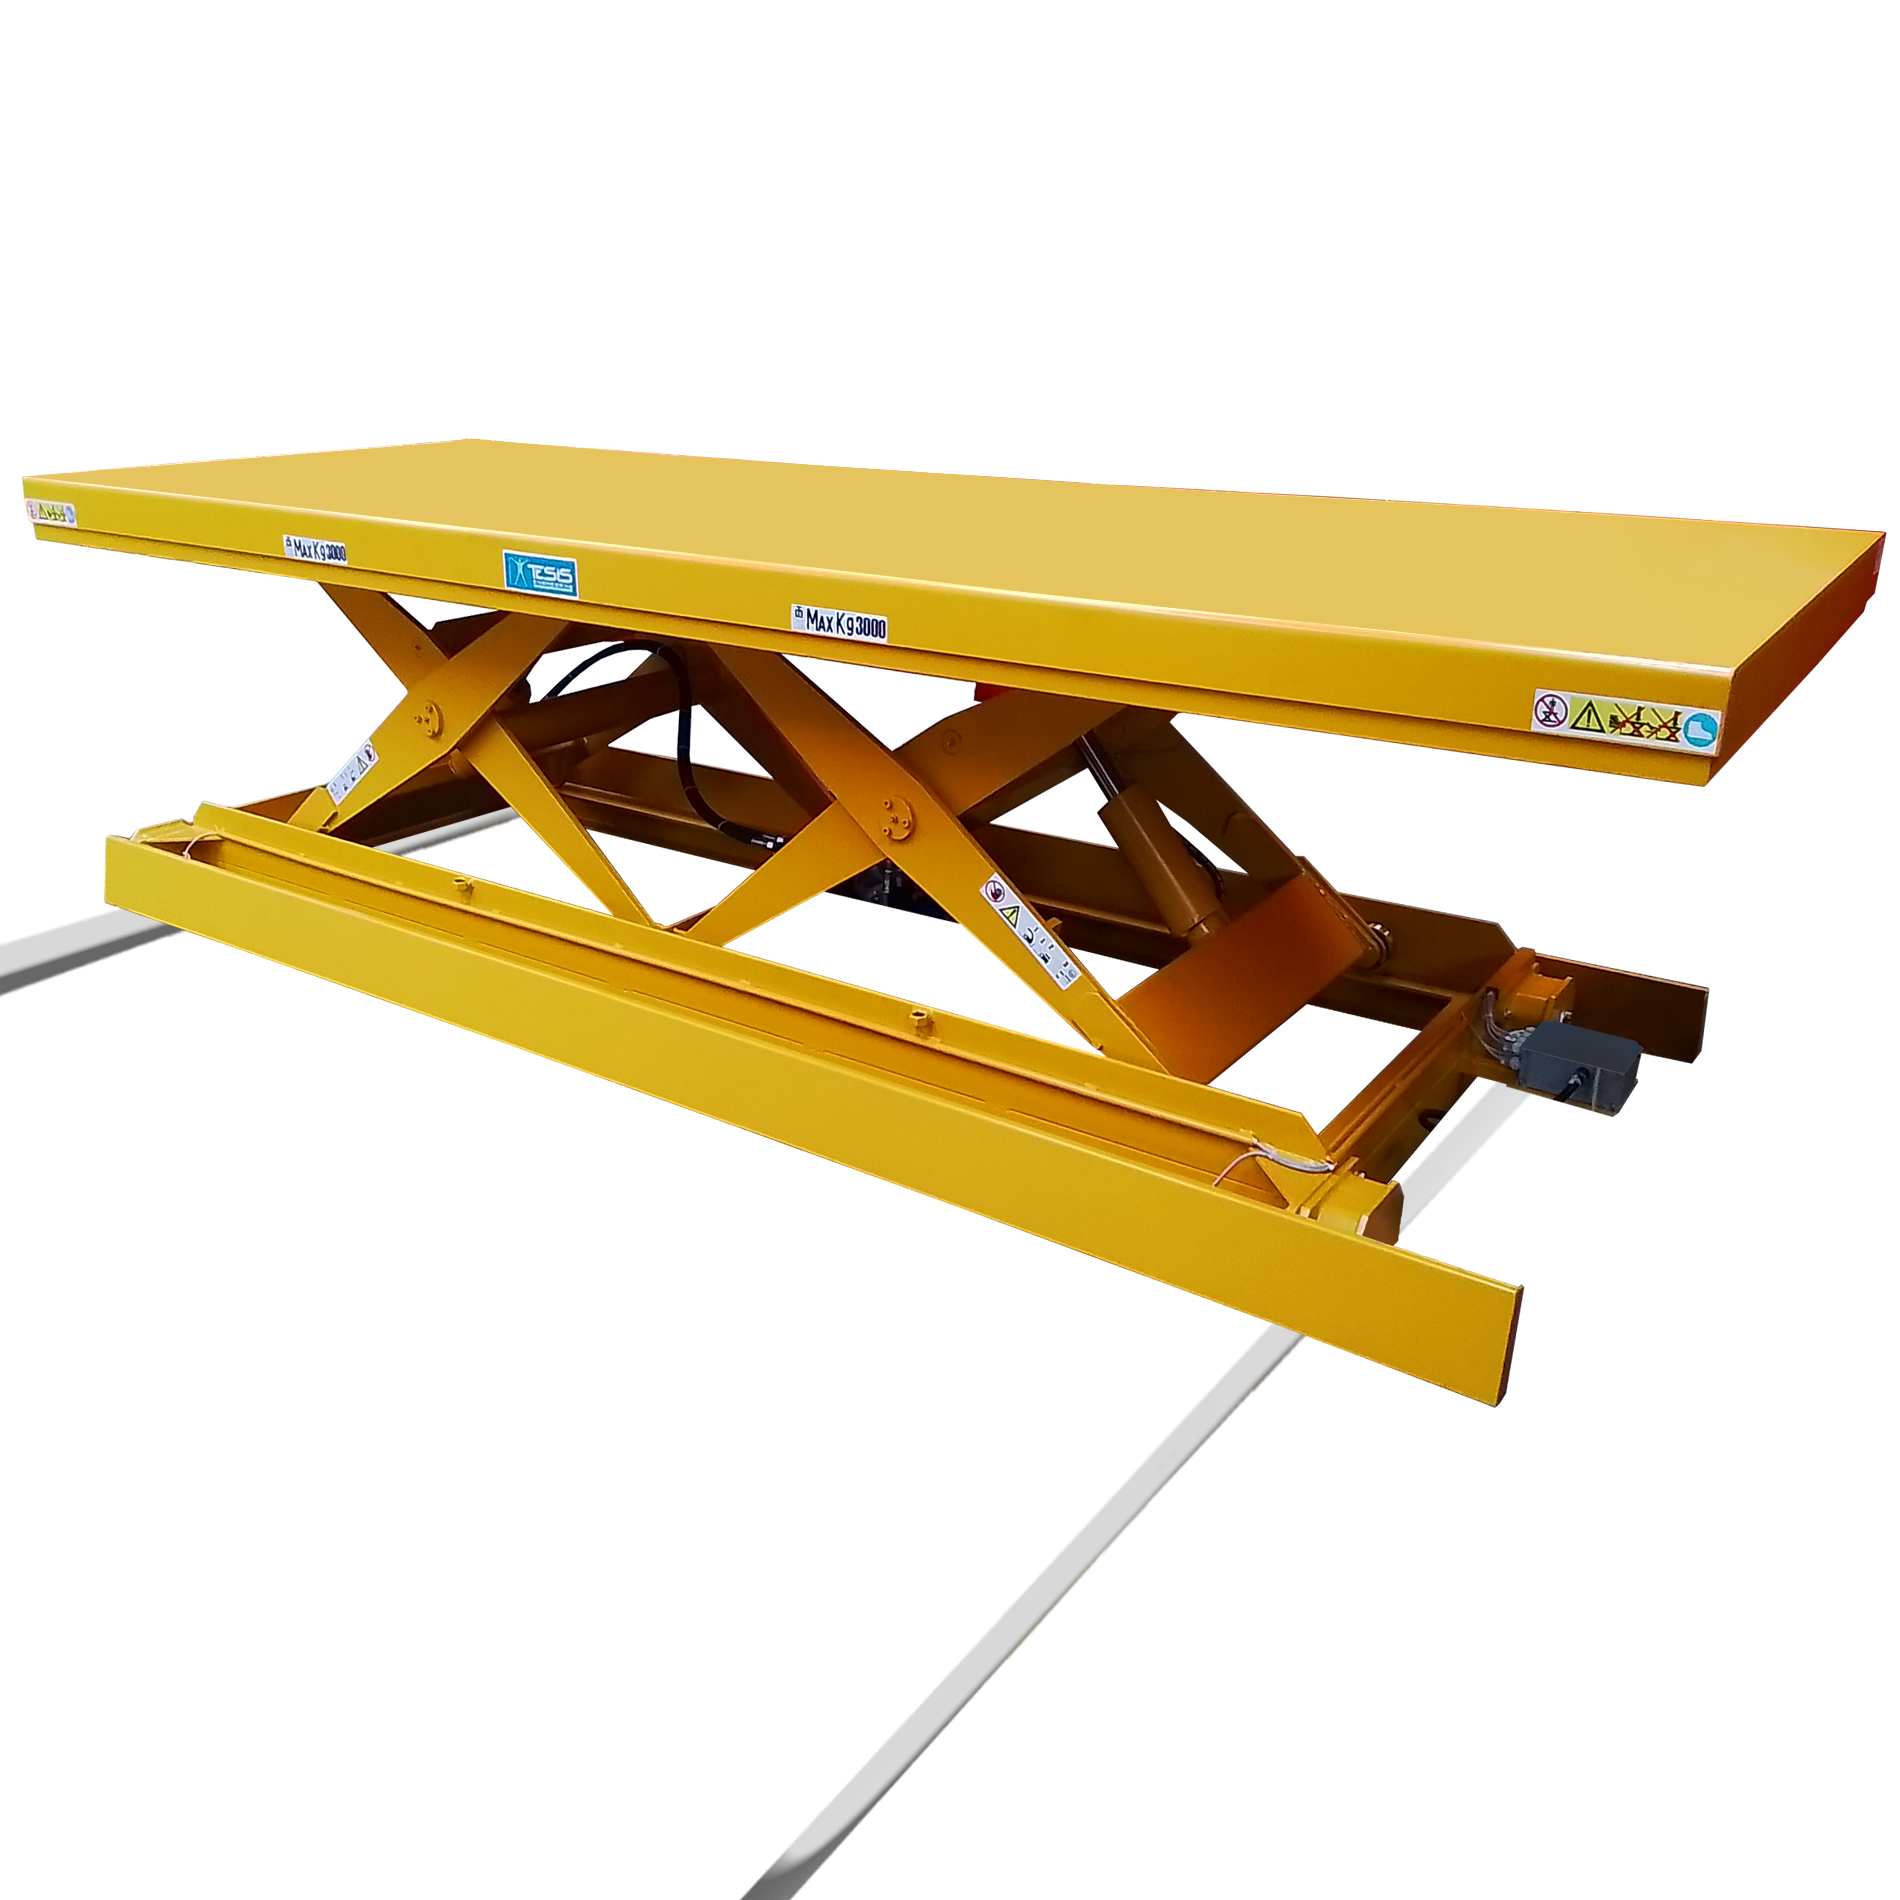 Self-propelled tandem lift table, mobile lift table with powered traverse, powered side traverse  platform lifts, powered traverse lift tables, tandem lift tables, rail-guided mobile lift tables, tandem scissor lifting platforms